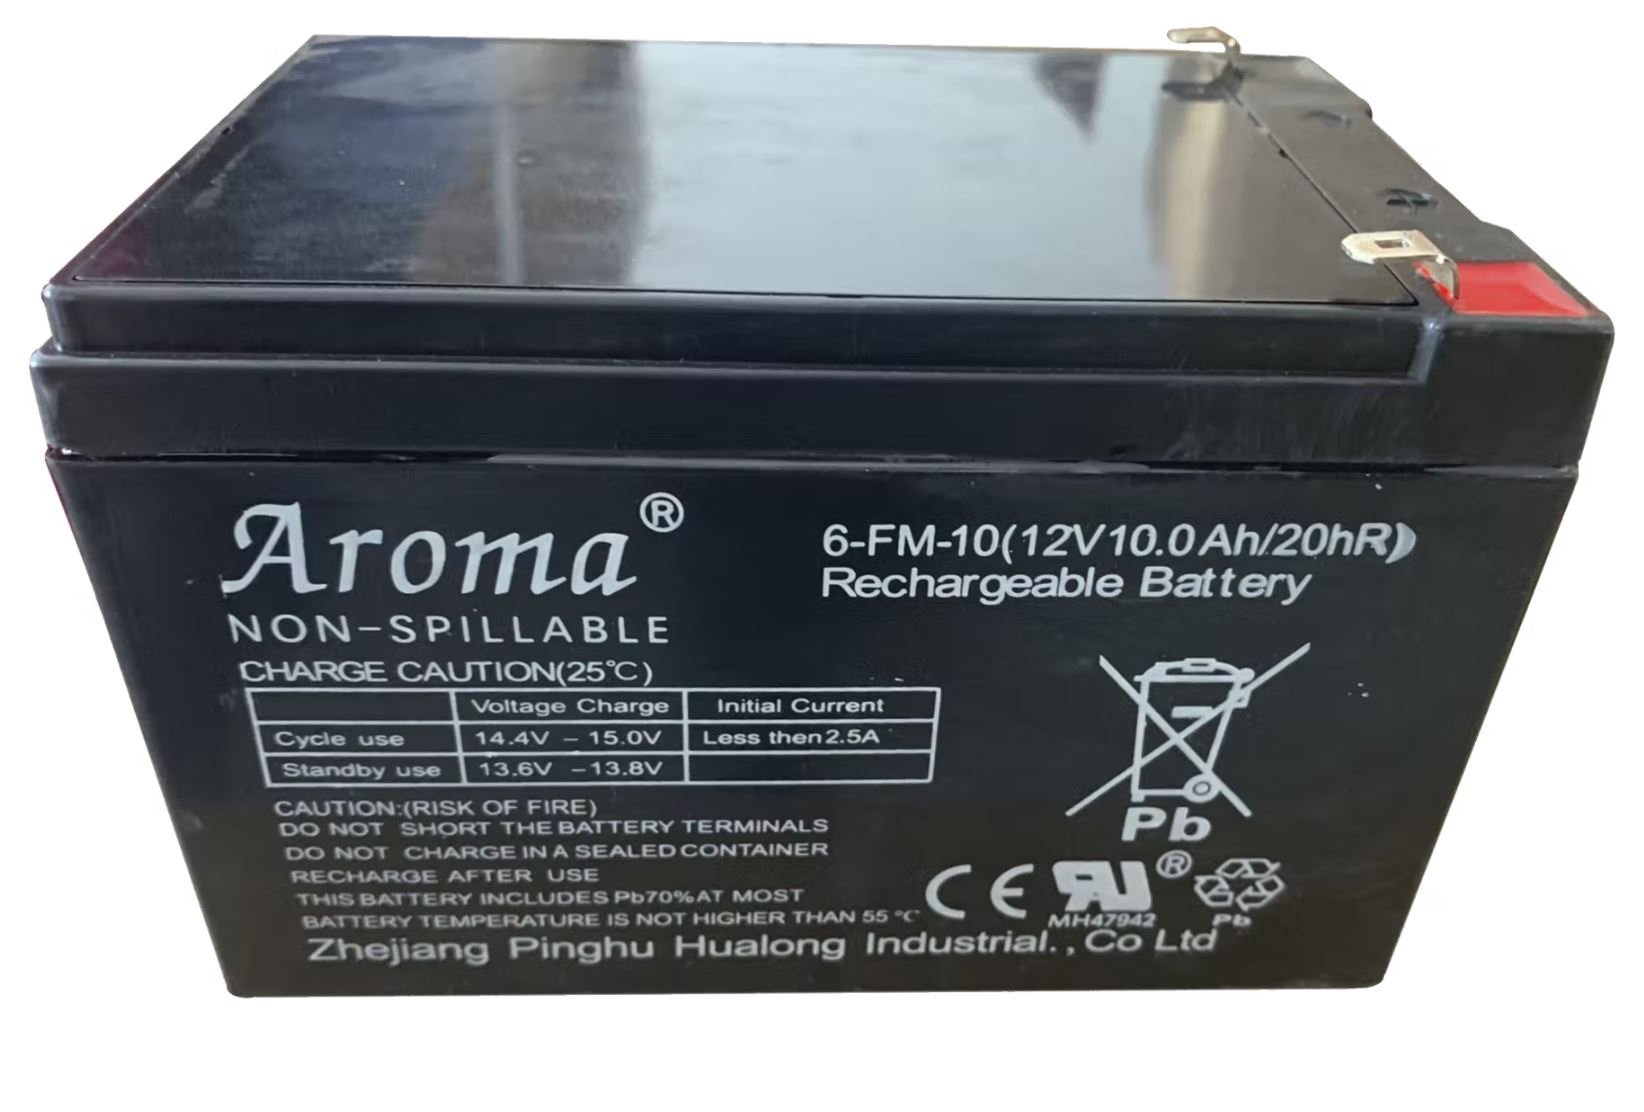 Battery for Electric Cars - 12V/10A (69502114)